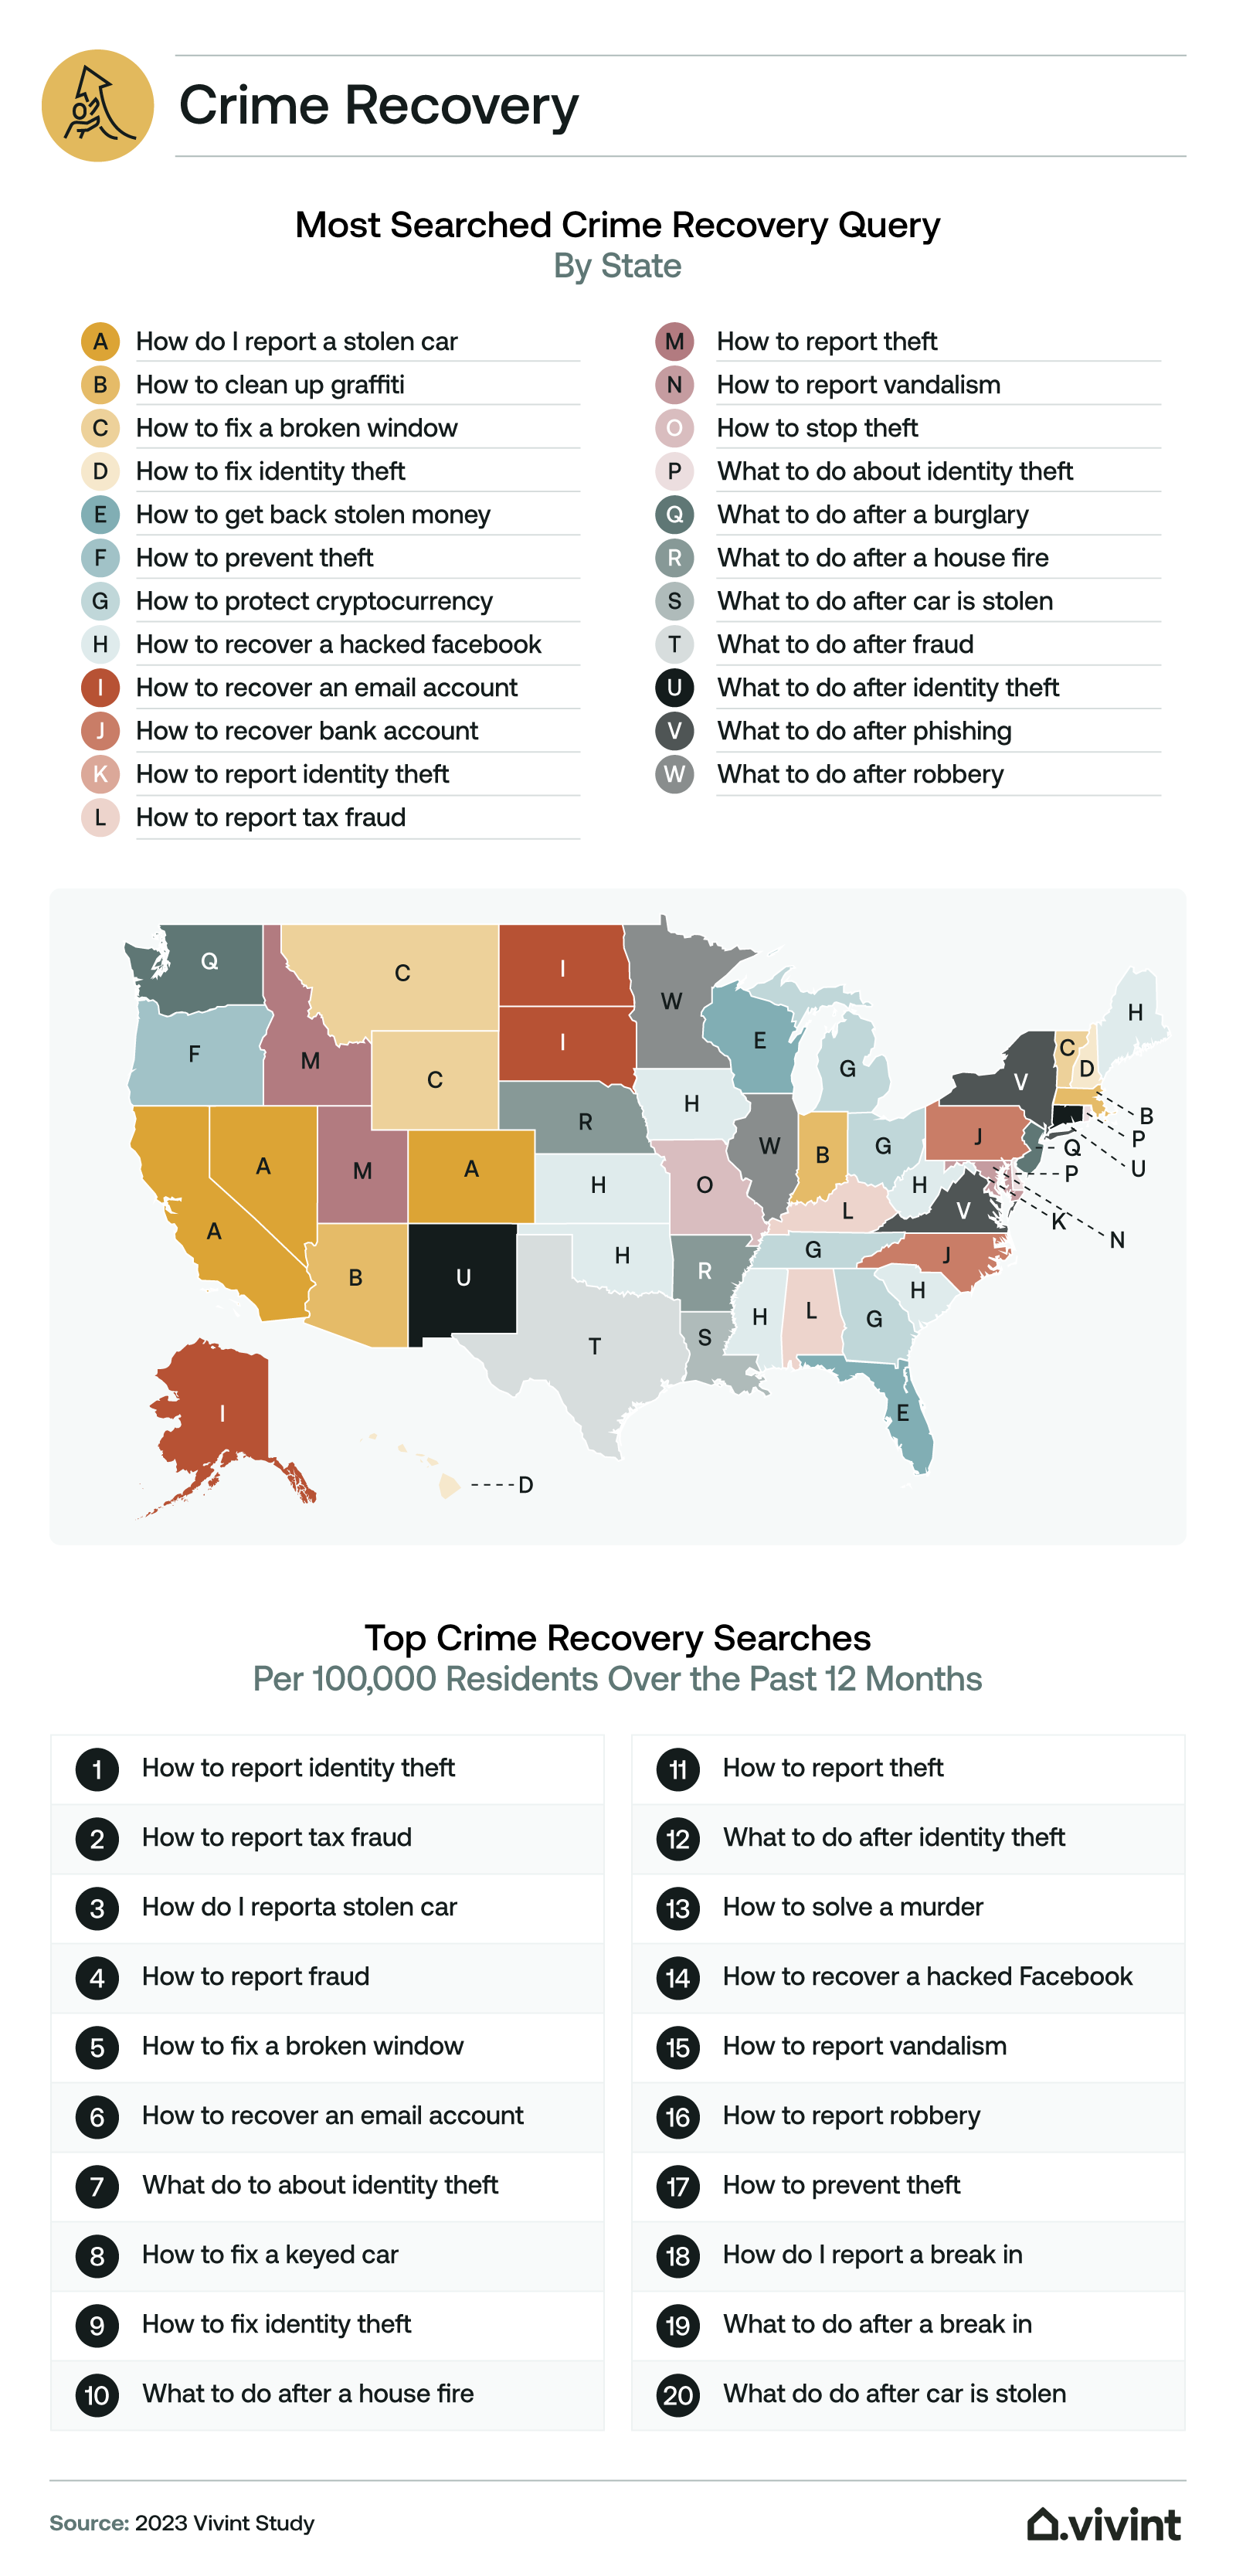 Information about the most-searched crime recovery searches.